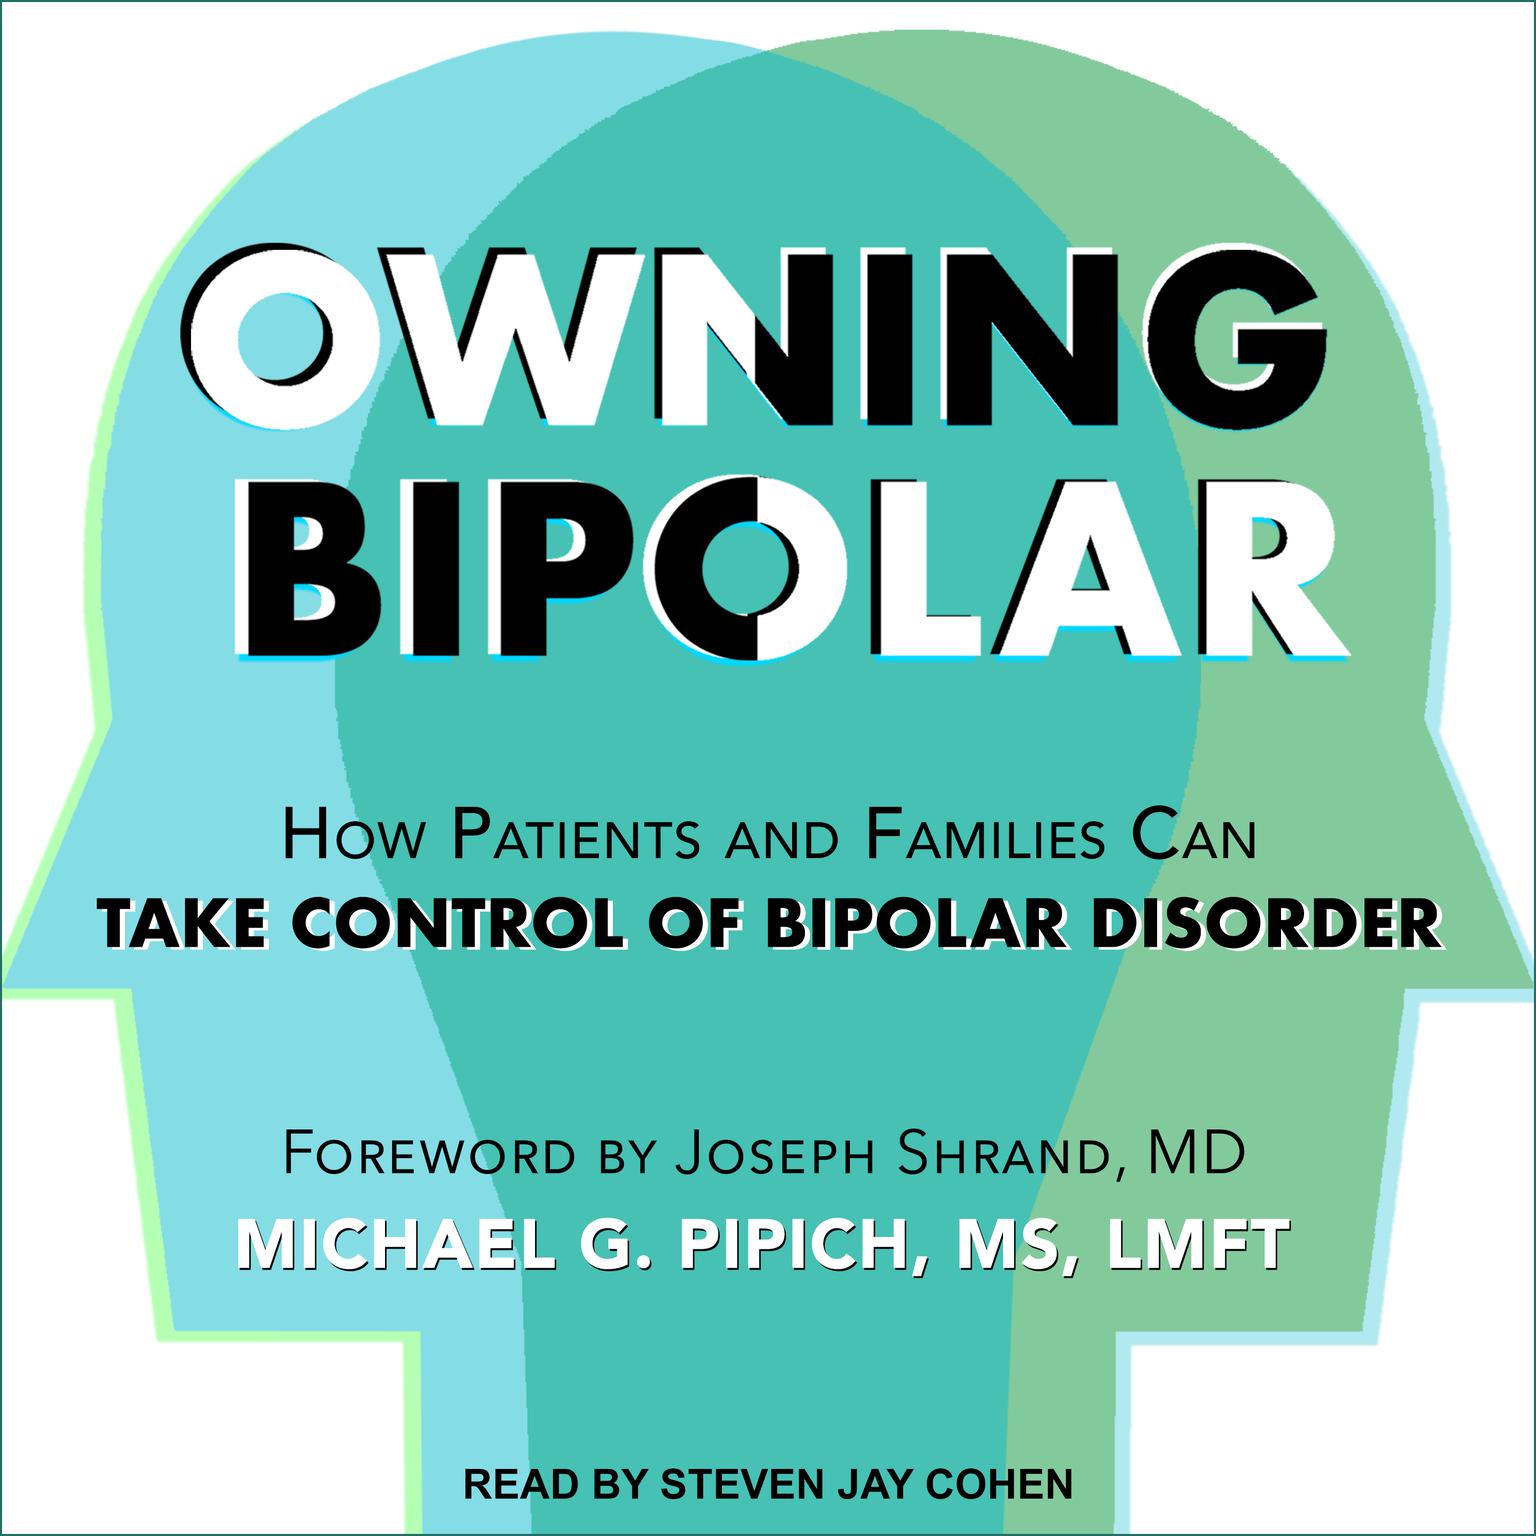 Owning Bipolar: How Patients and Families Can Take Control of Bipolar Disorder Audiobook, by Michael G. Pipich